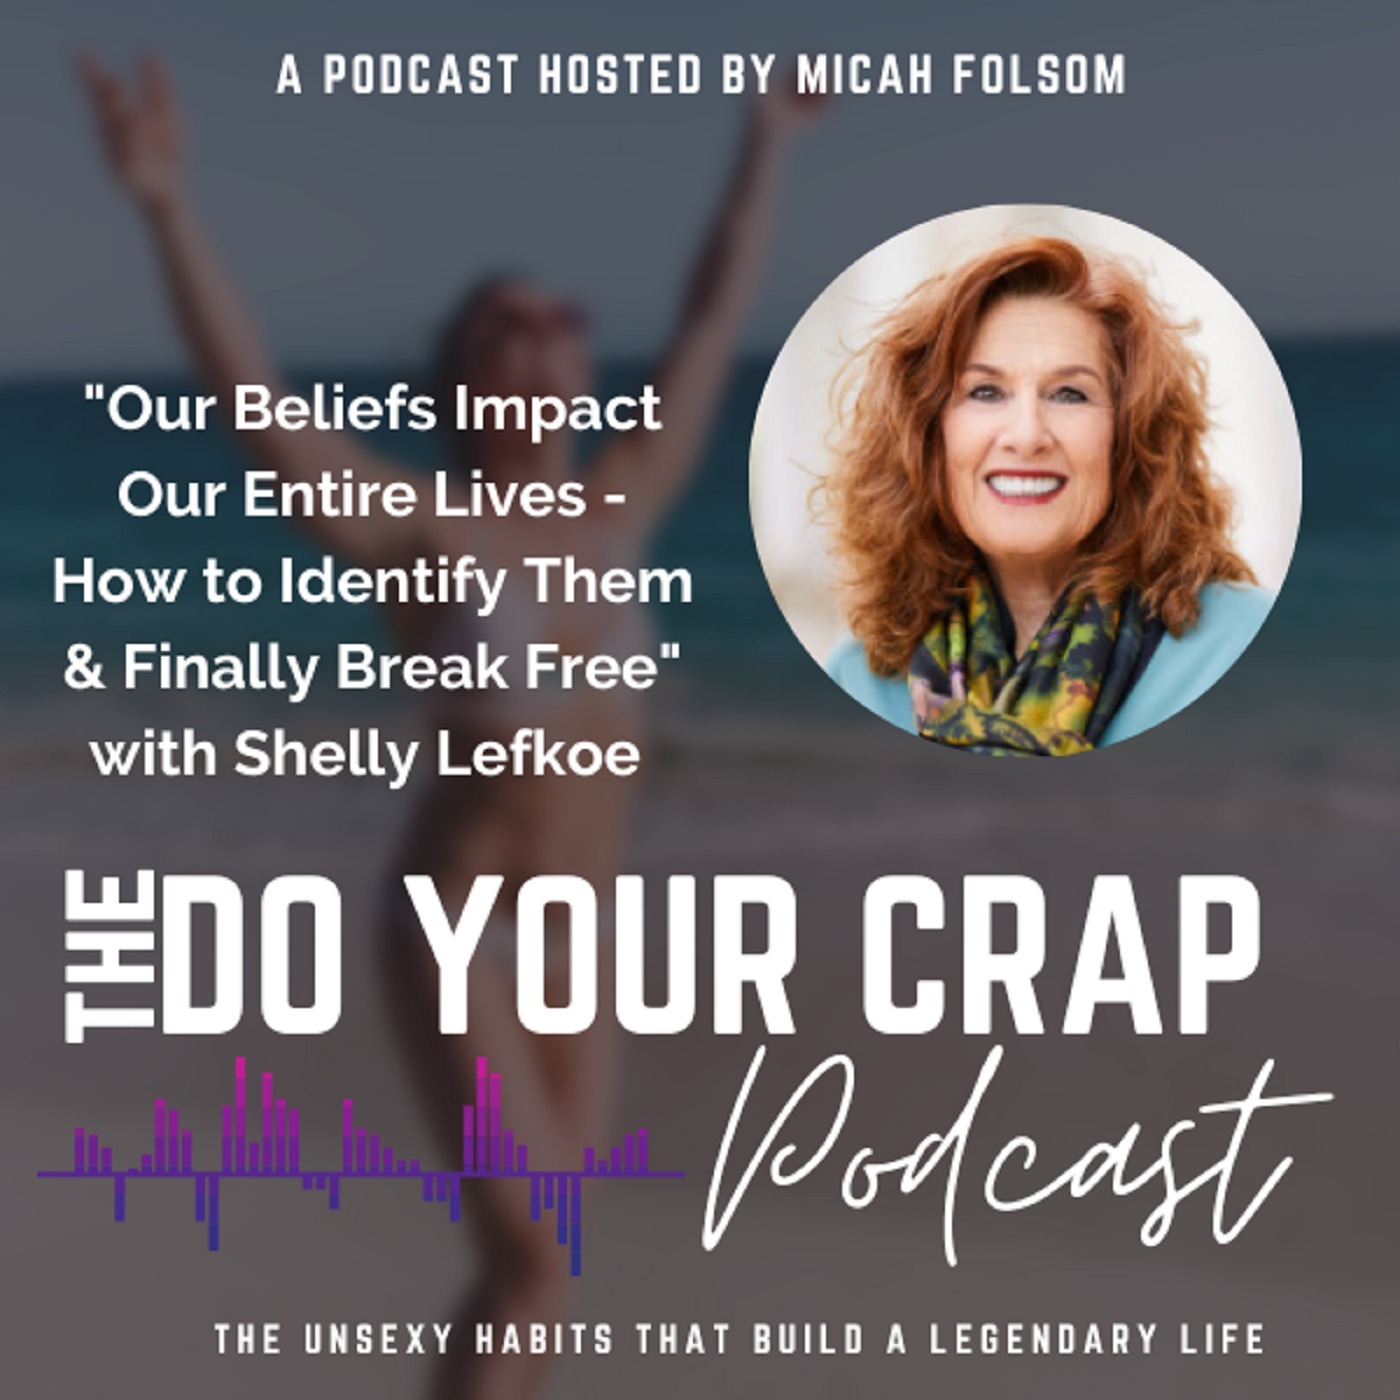 Our Beliefs Impact Our Entire Lives - How to Identify Them & Finally Break Free with Shelly Lefkoe